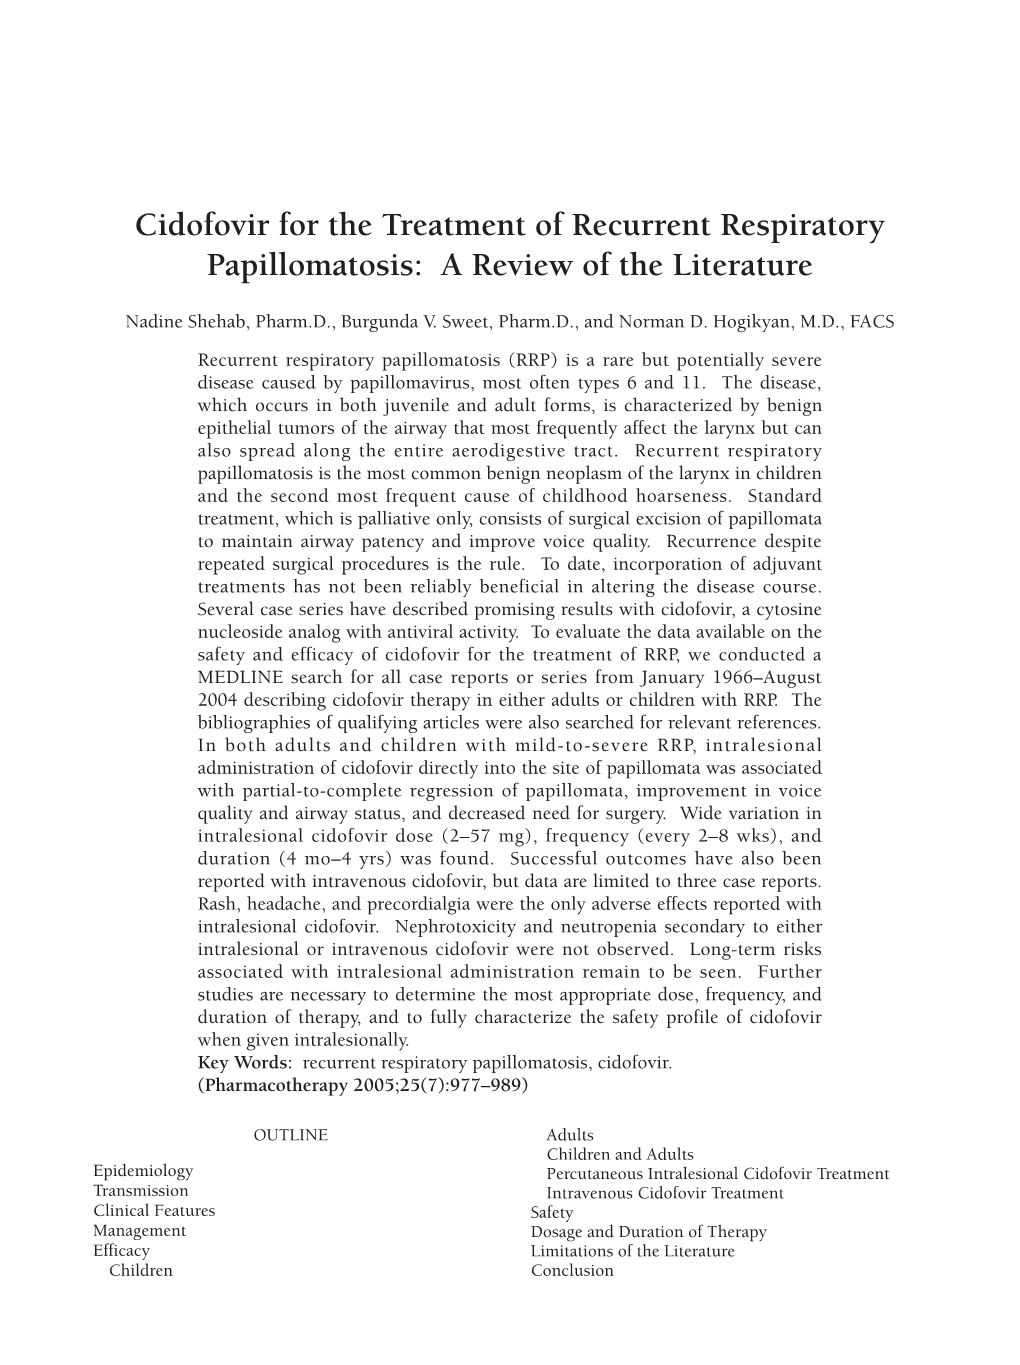 Cidofovir for the Treatment of Recurrent Respiratory Papillomatosis: a Review of the Literature